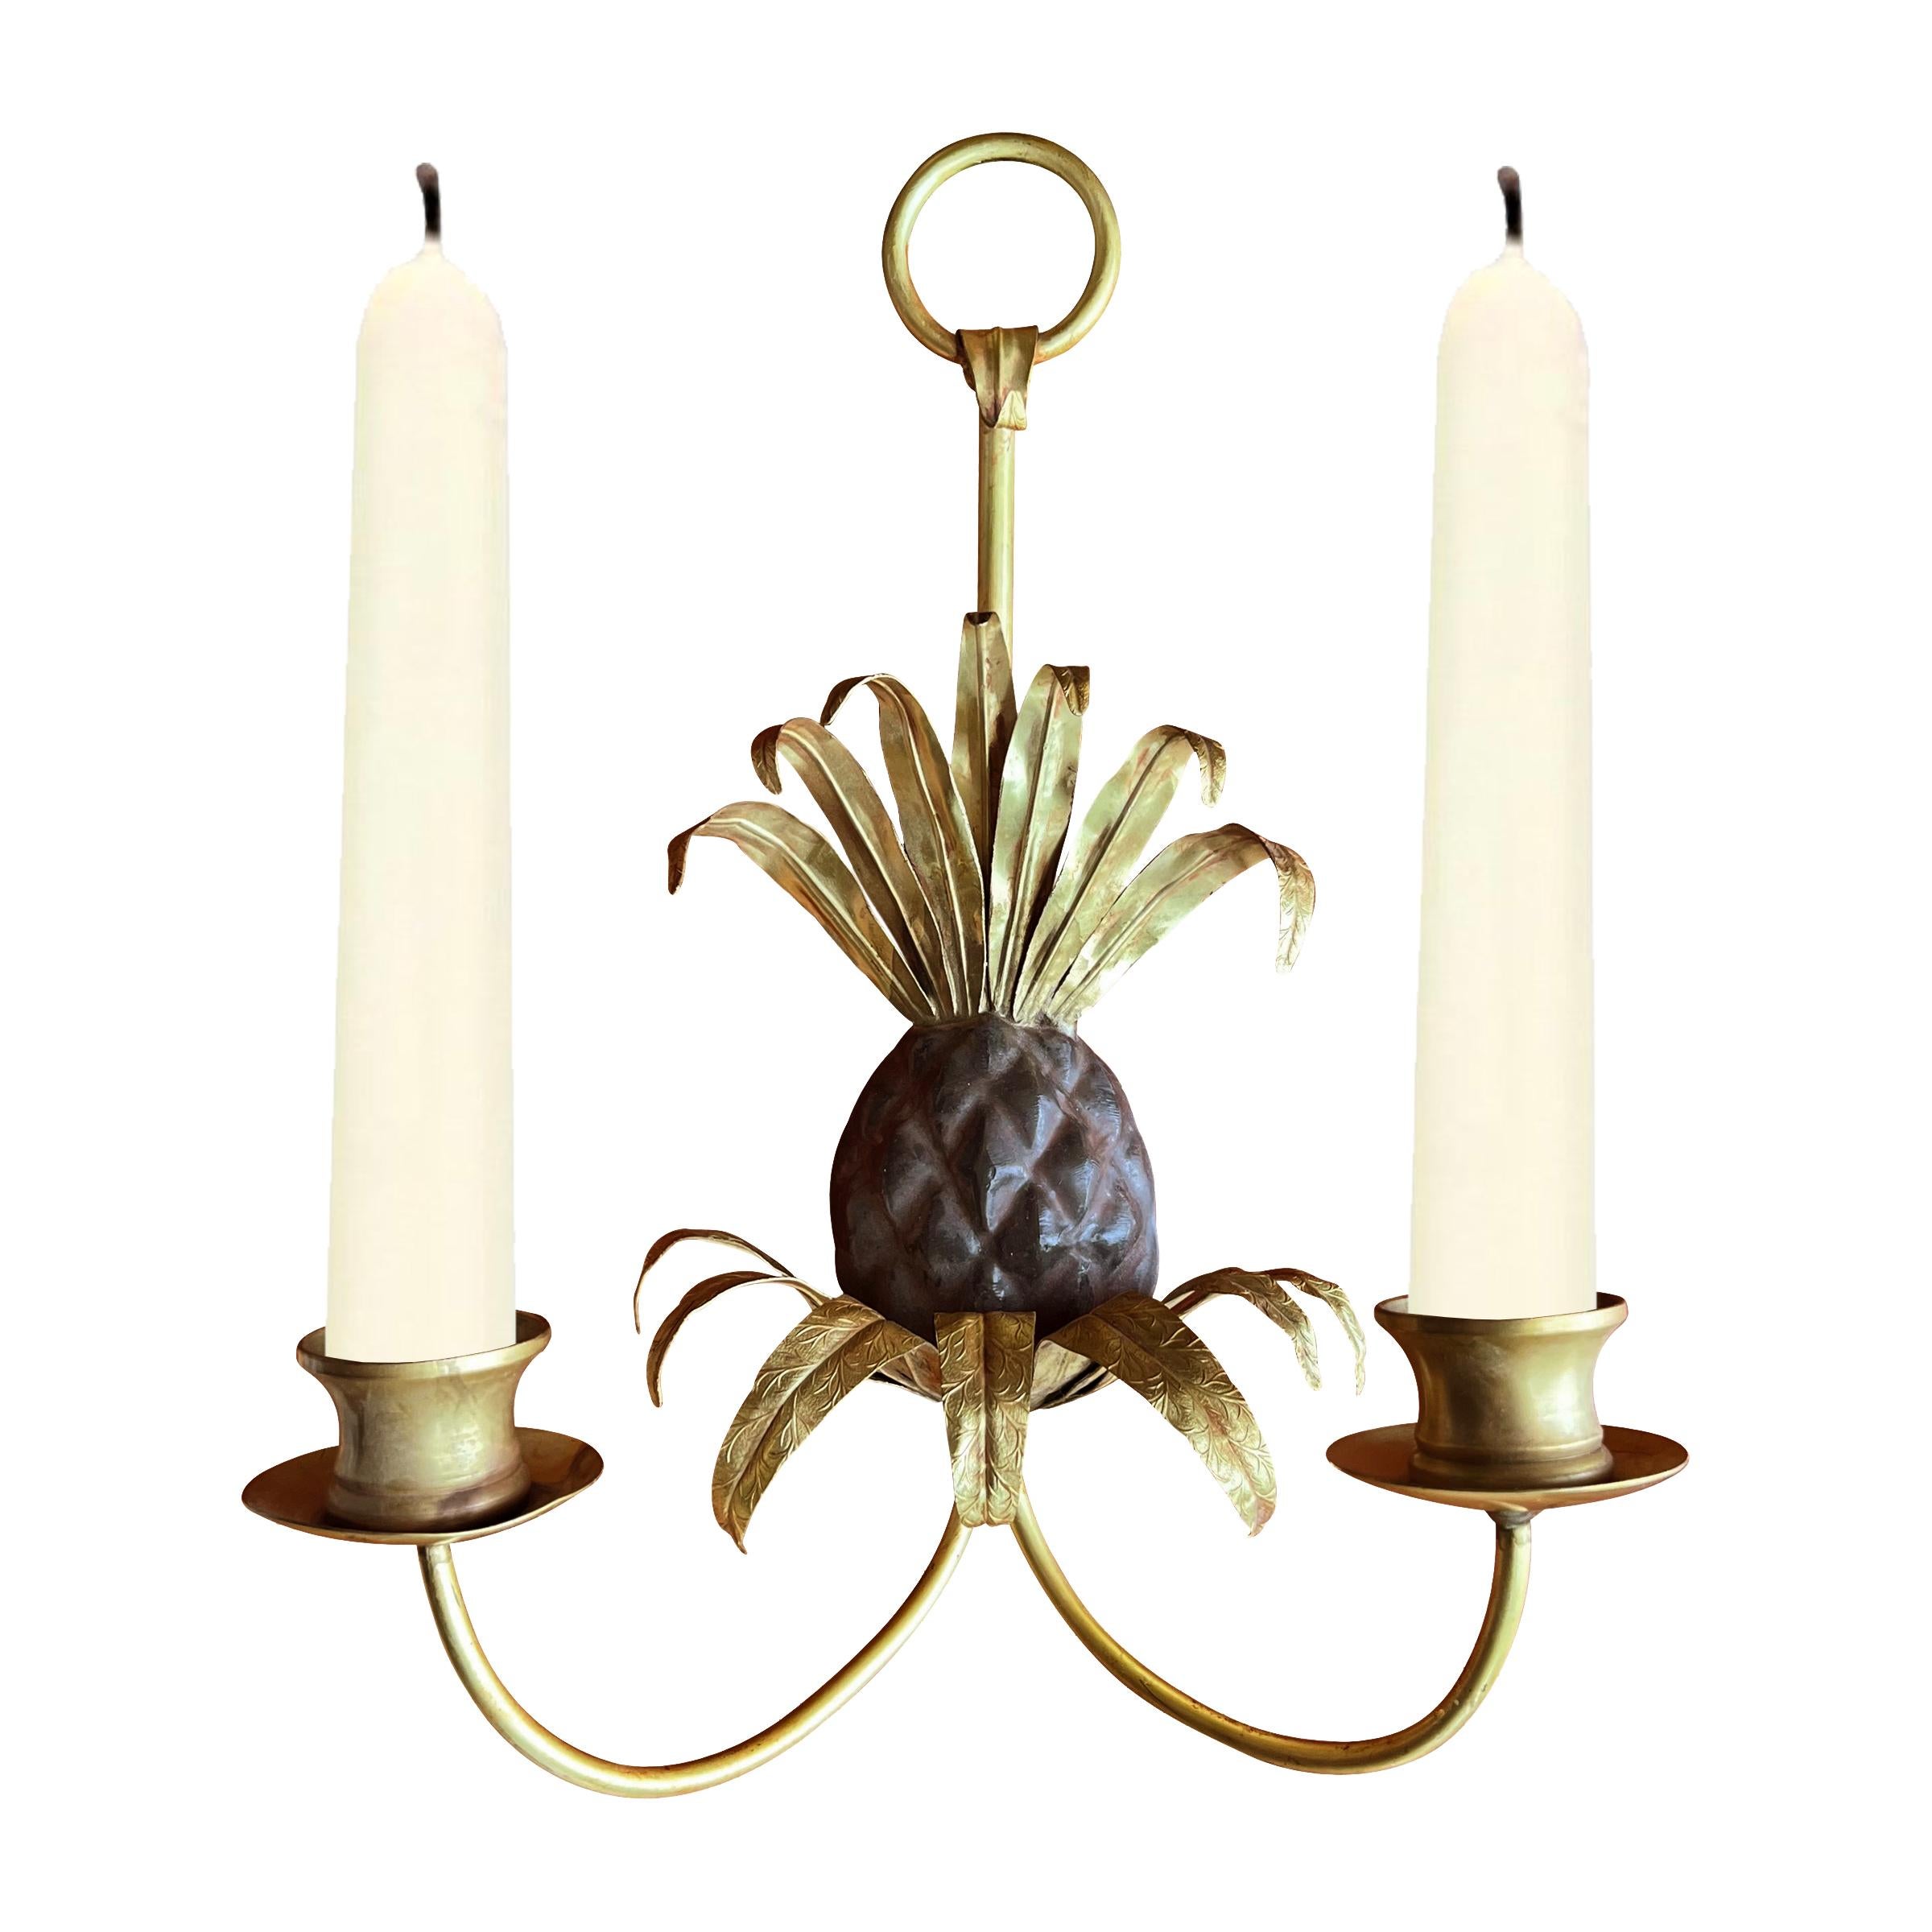 Mid-Century Modern Pair of Vintage Pineapple Candle Sconces